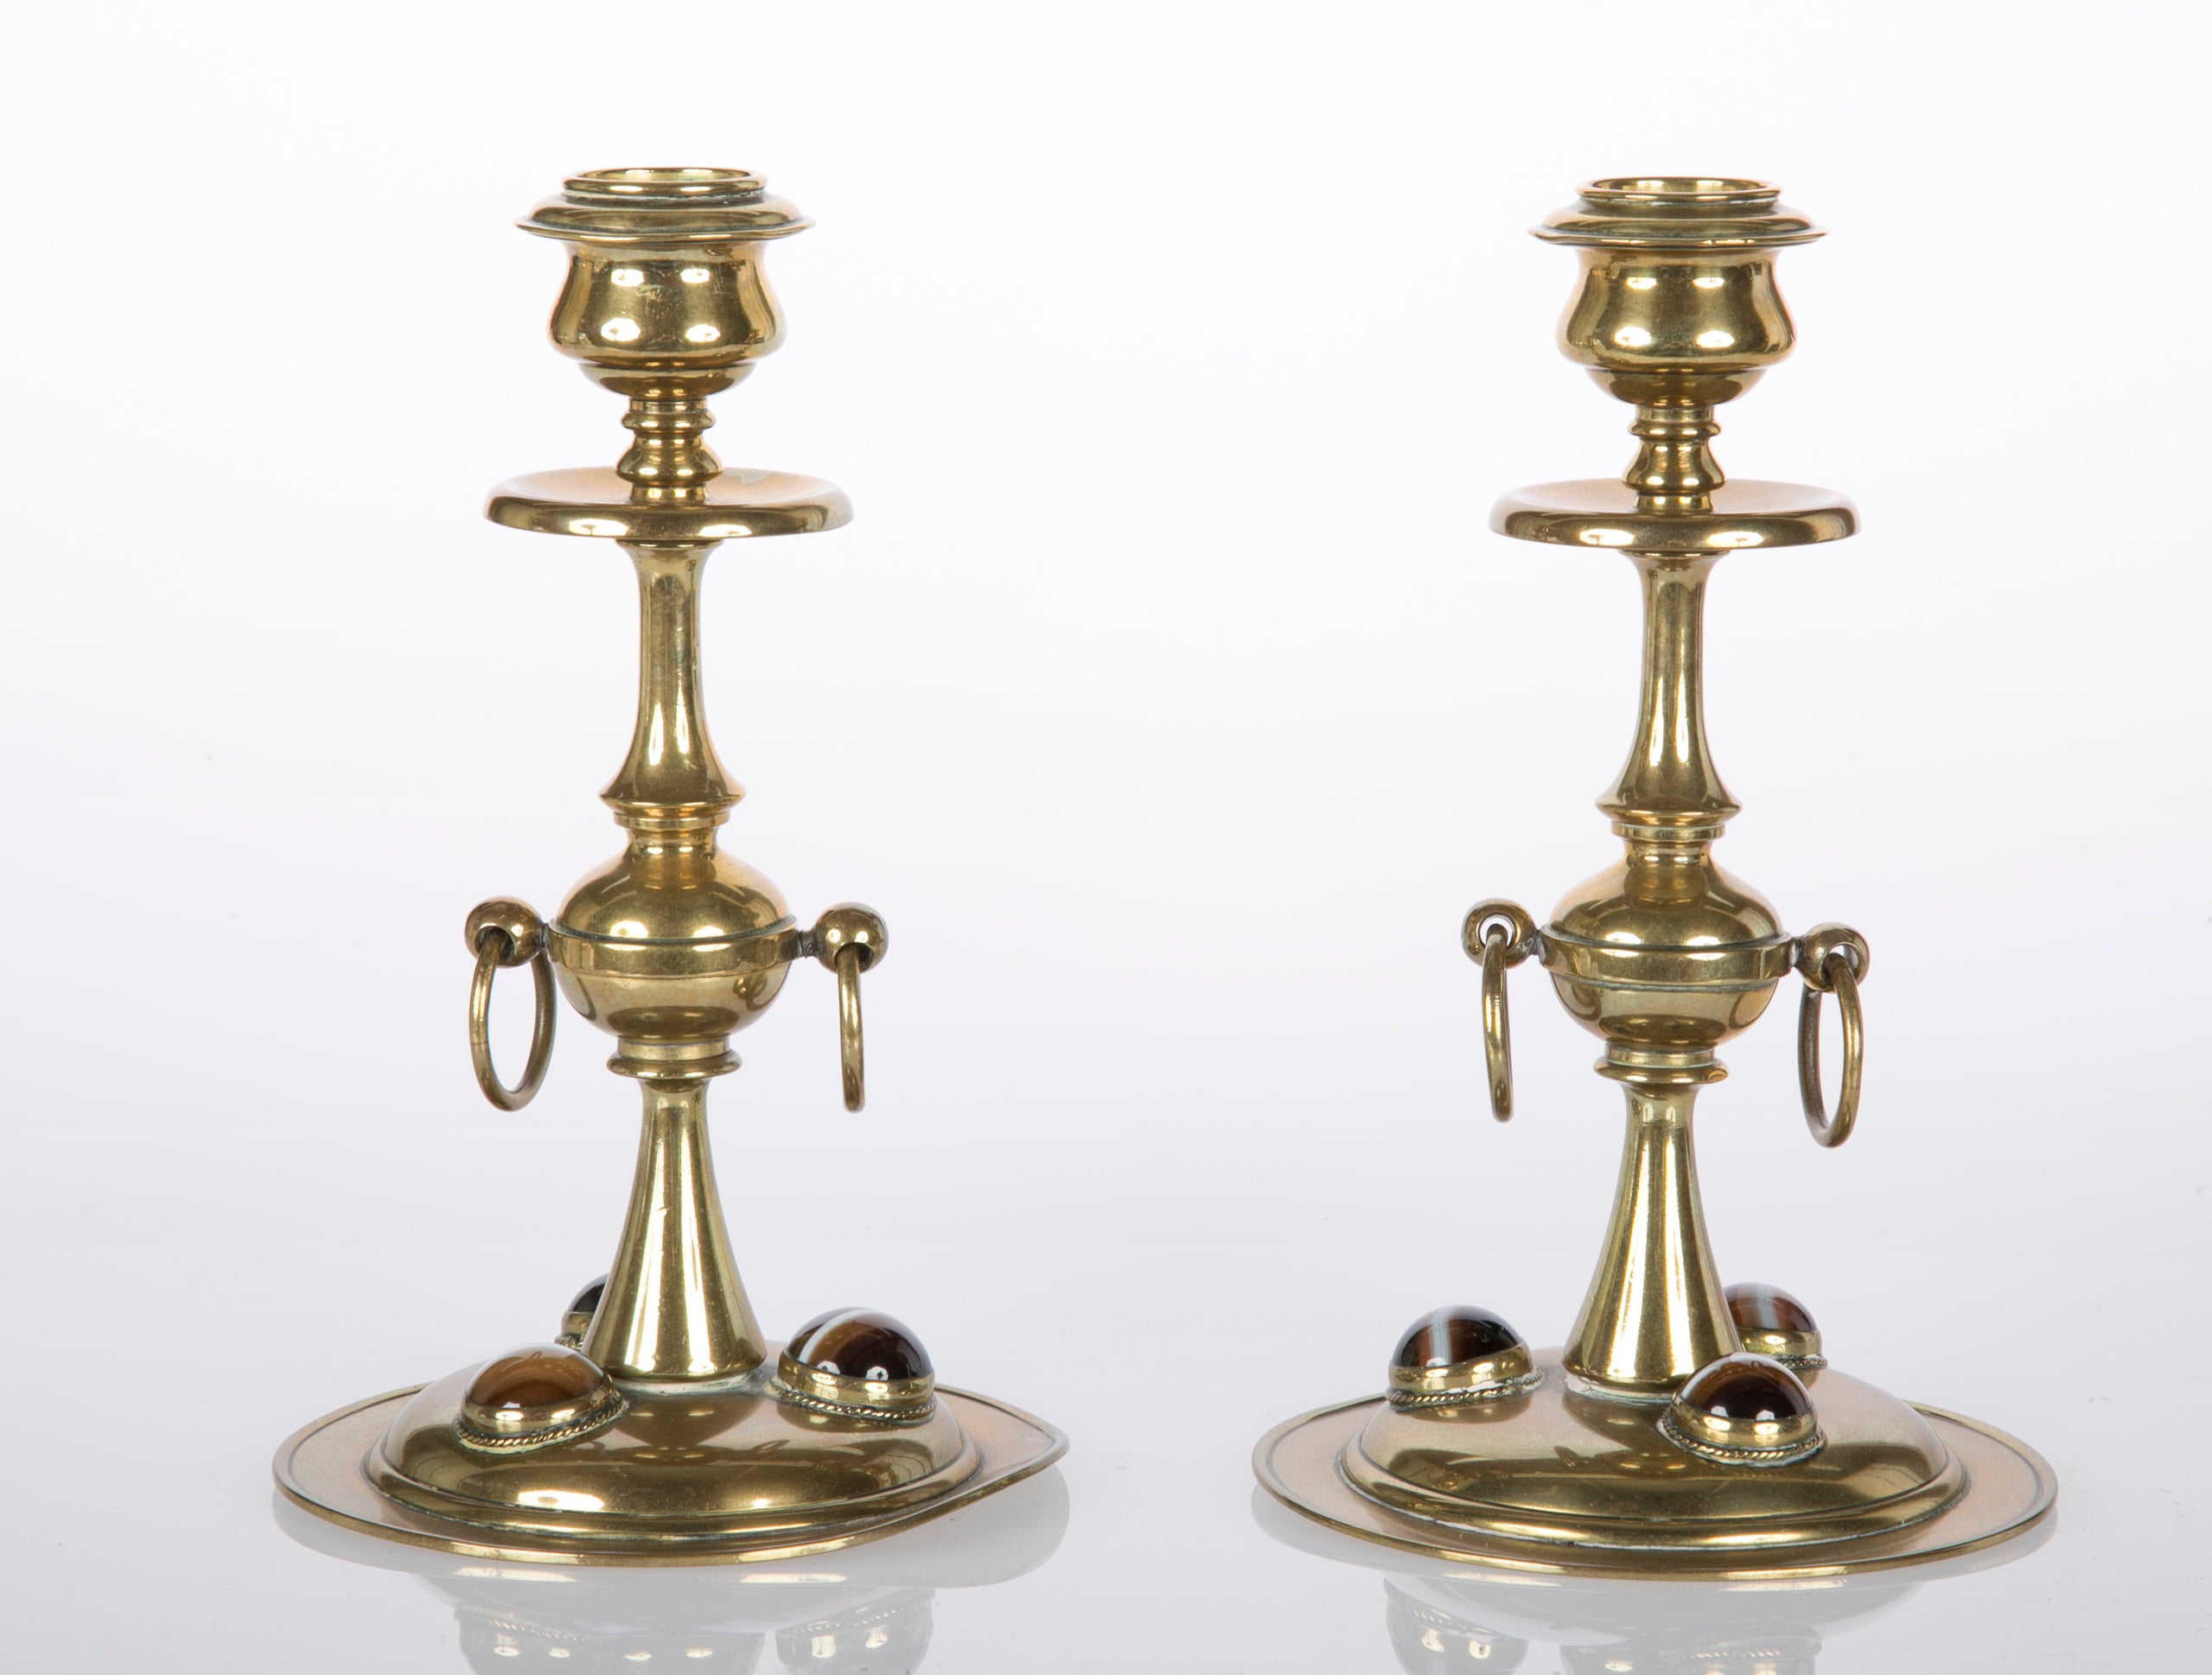 Arts and Crafts Candlesticks